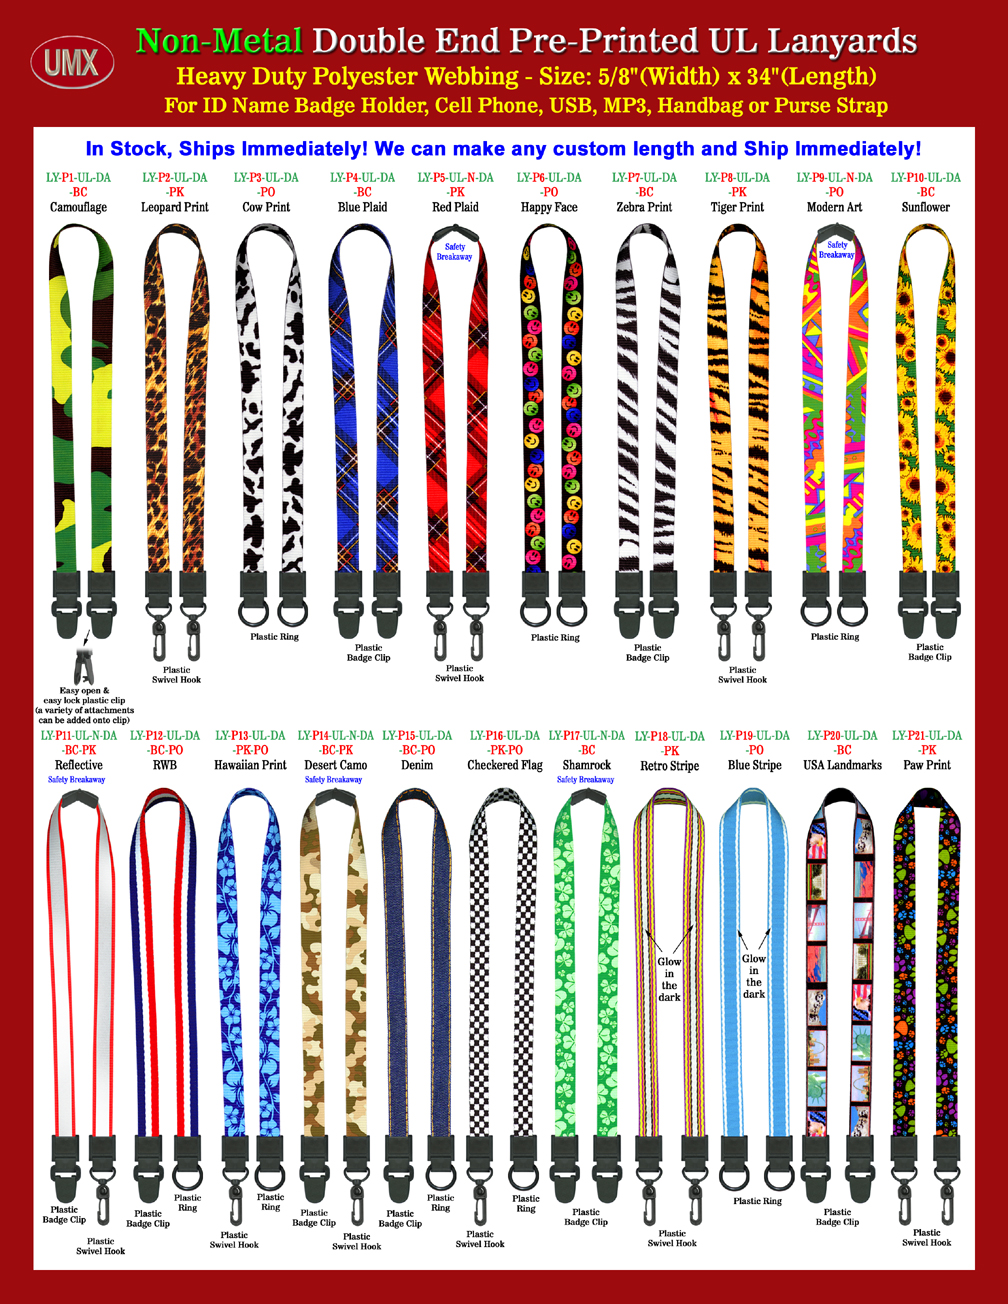 Universal Link: All Scan-Safe Pre-Printed Pattern Double Hardware Attachment Neck Lanyards